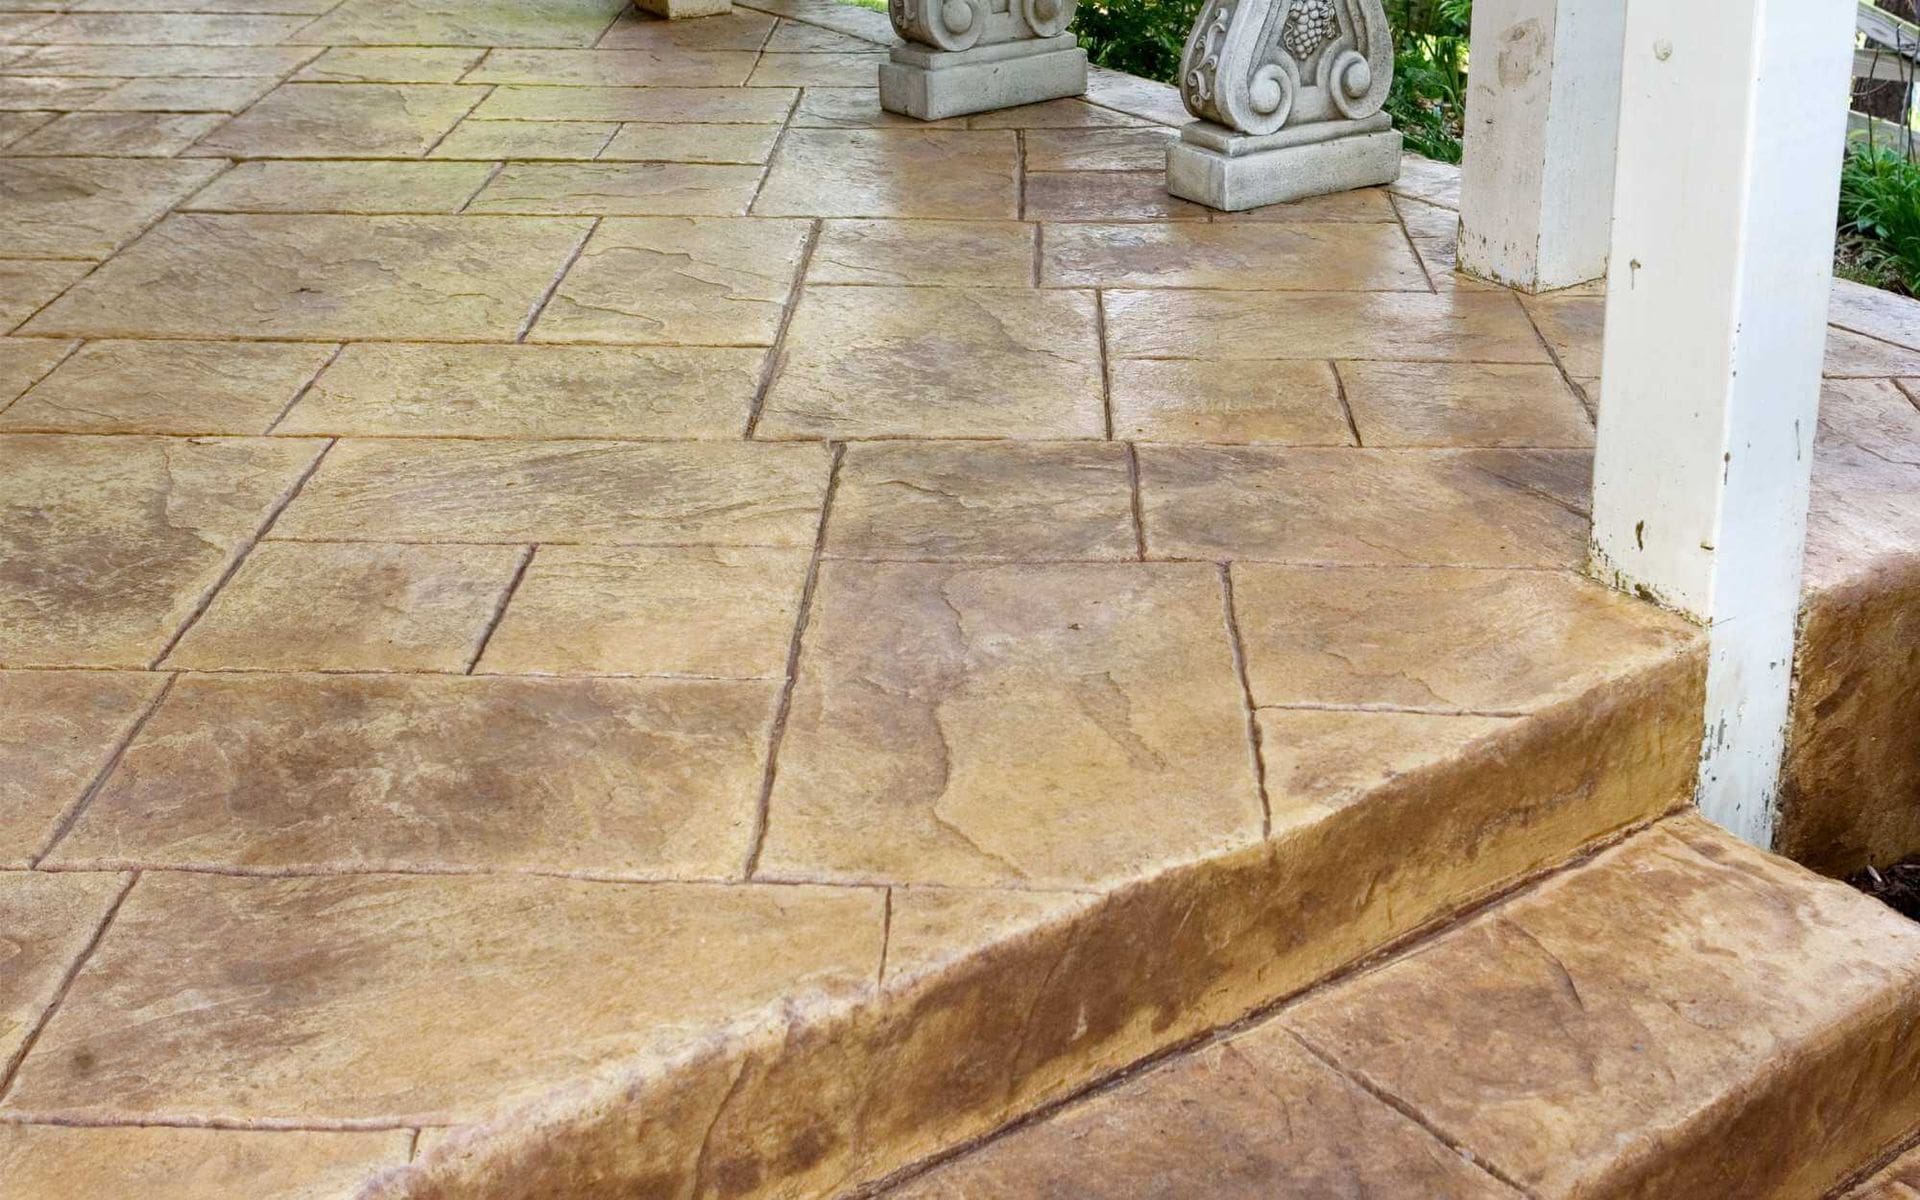 A close-up of a porch in El Mirage with textured, stamped concrete in a pattern resembling large tiles. The concrete has a warm, earthy tone. Decorative stone columns and a bit of foliage are visible in the background, enhancing the aesthetic appeal similar to stylish residential driveways.